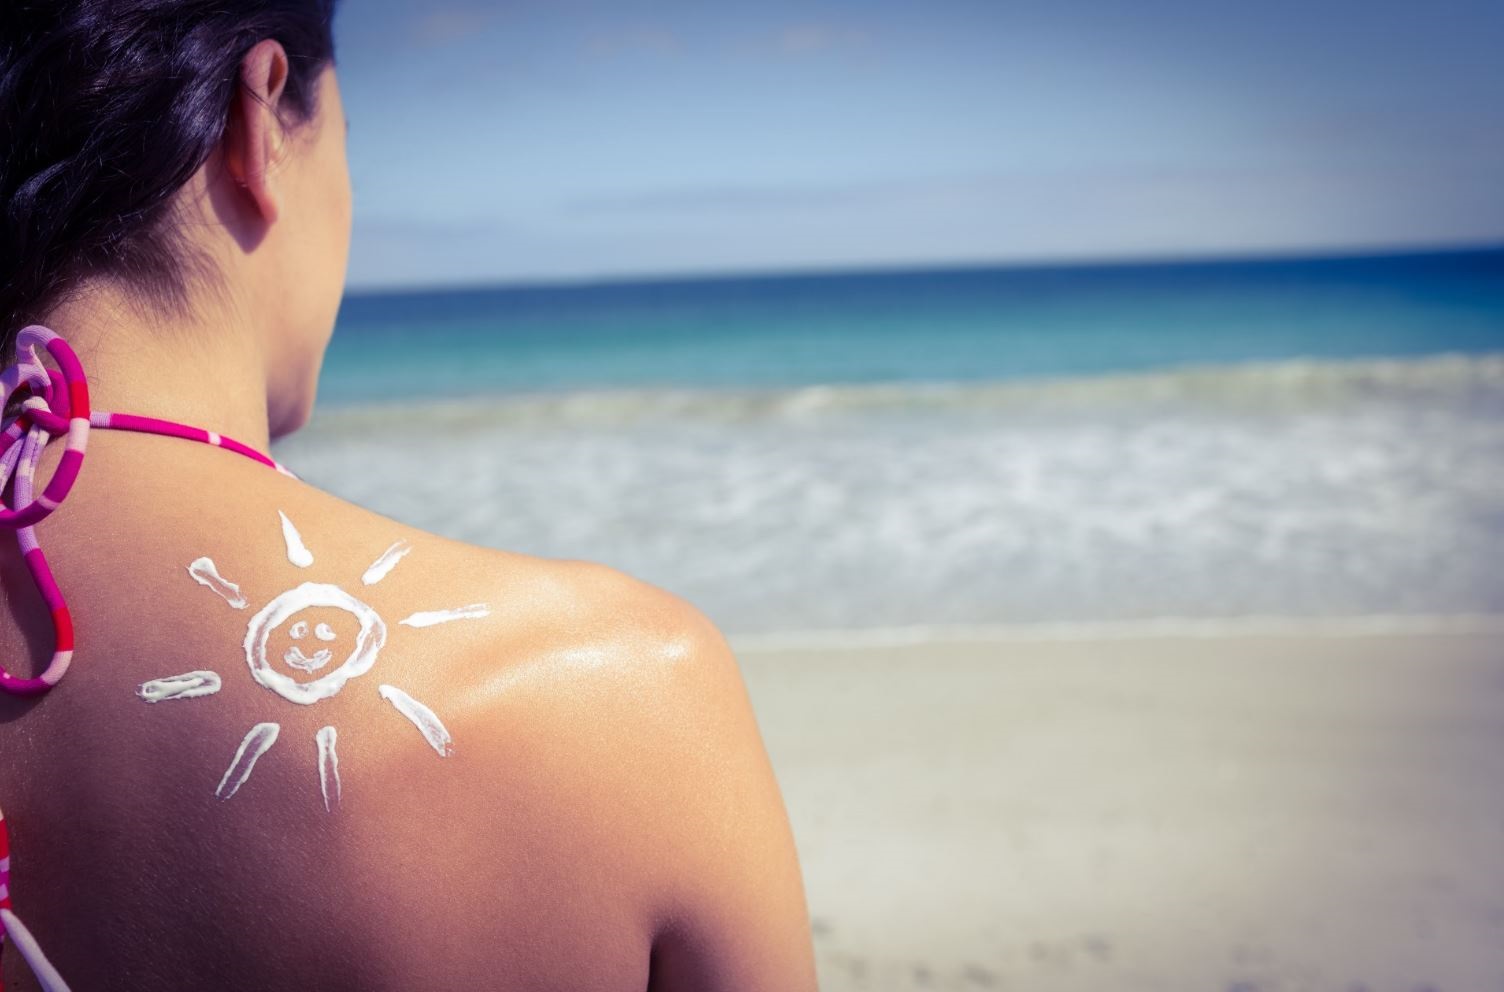 How to prevent the skin cancer